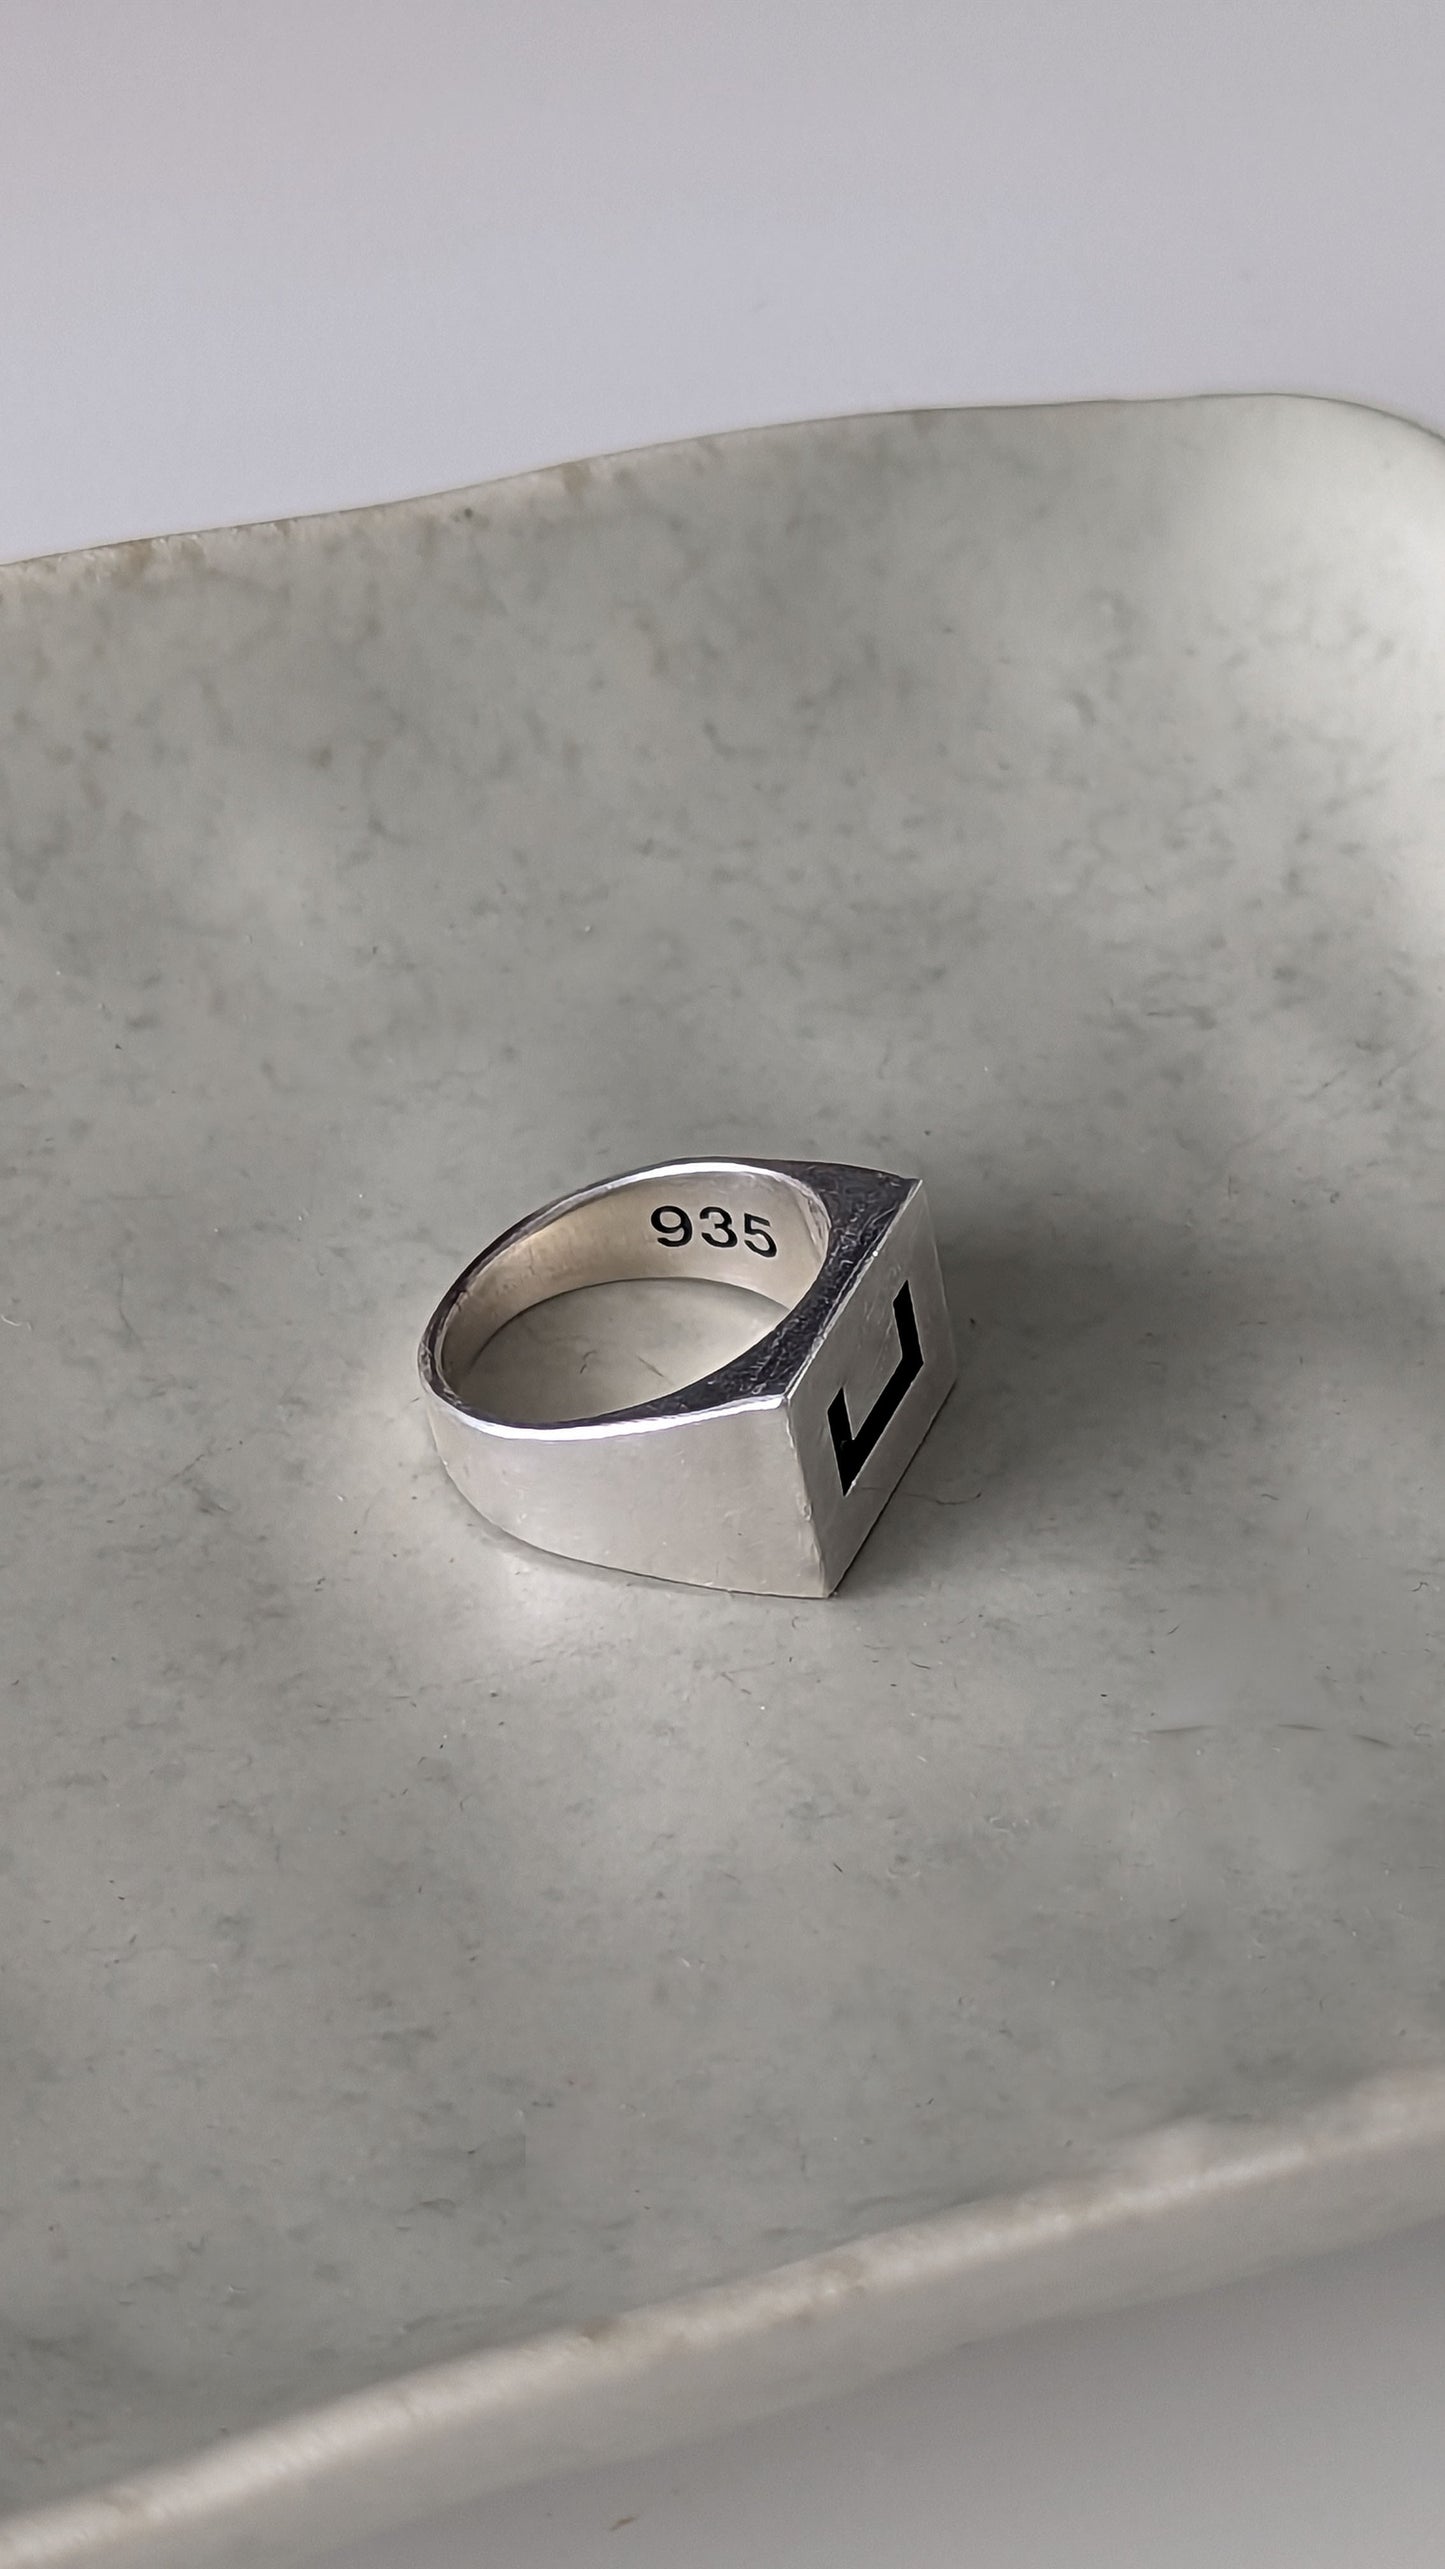 Side shot of product showcasing the Oxidized 935 detail on the inside of the ring